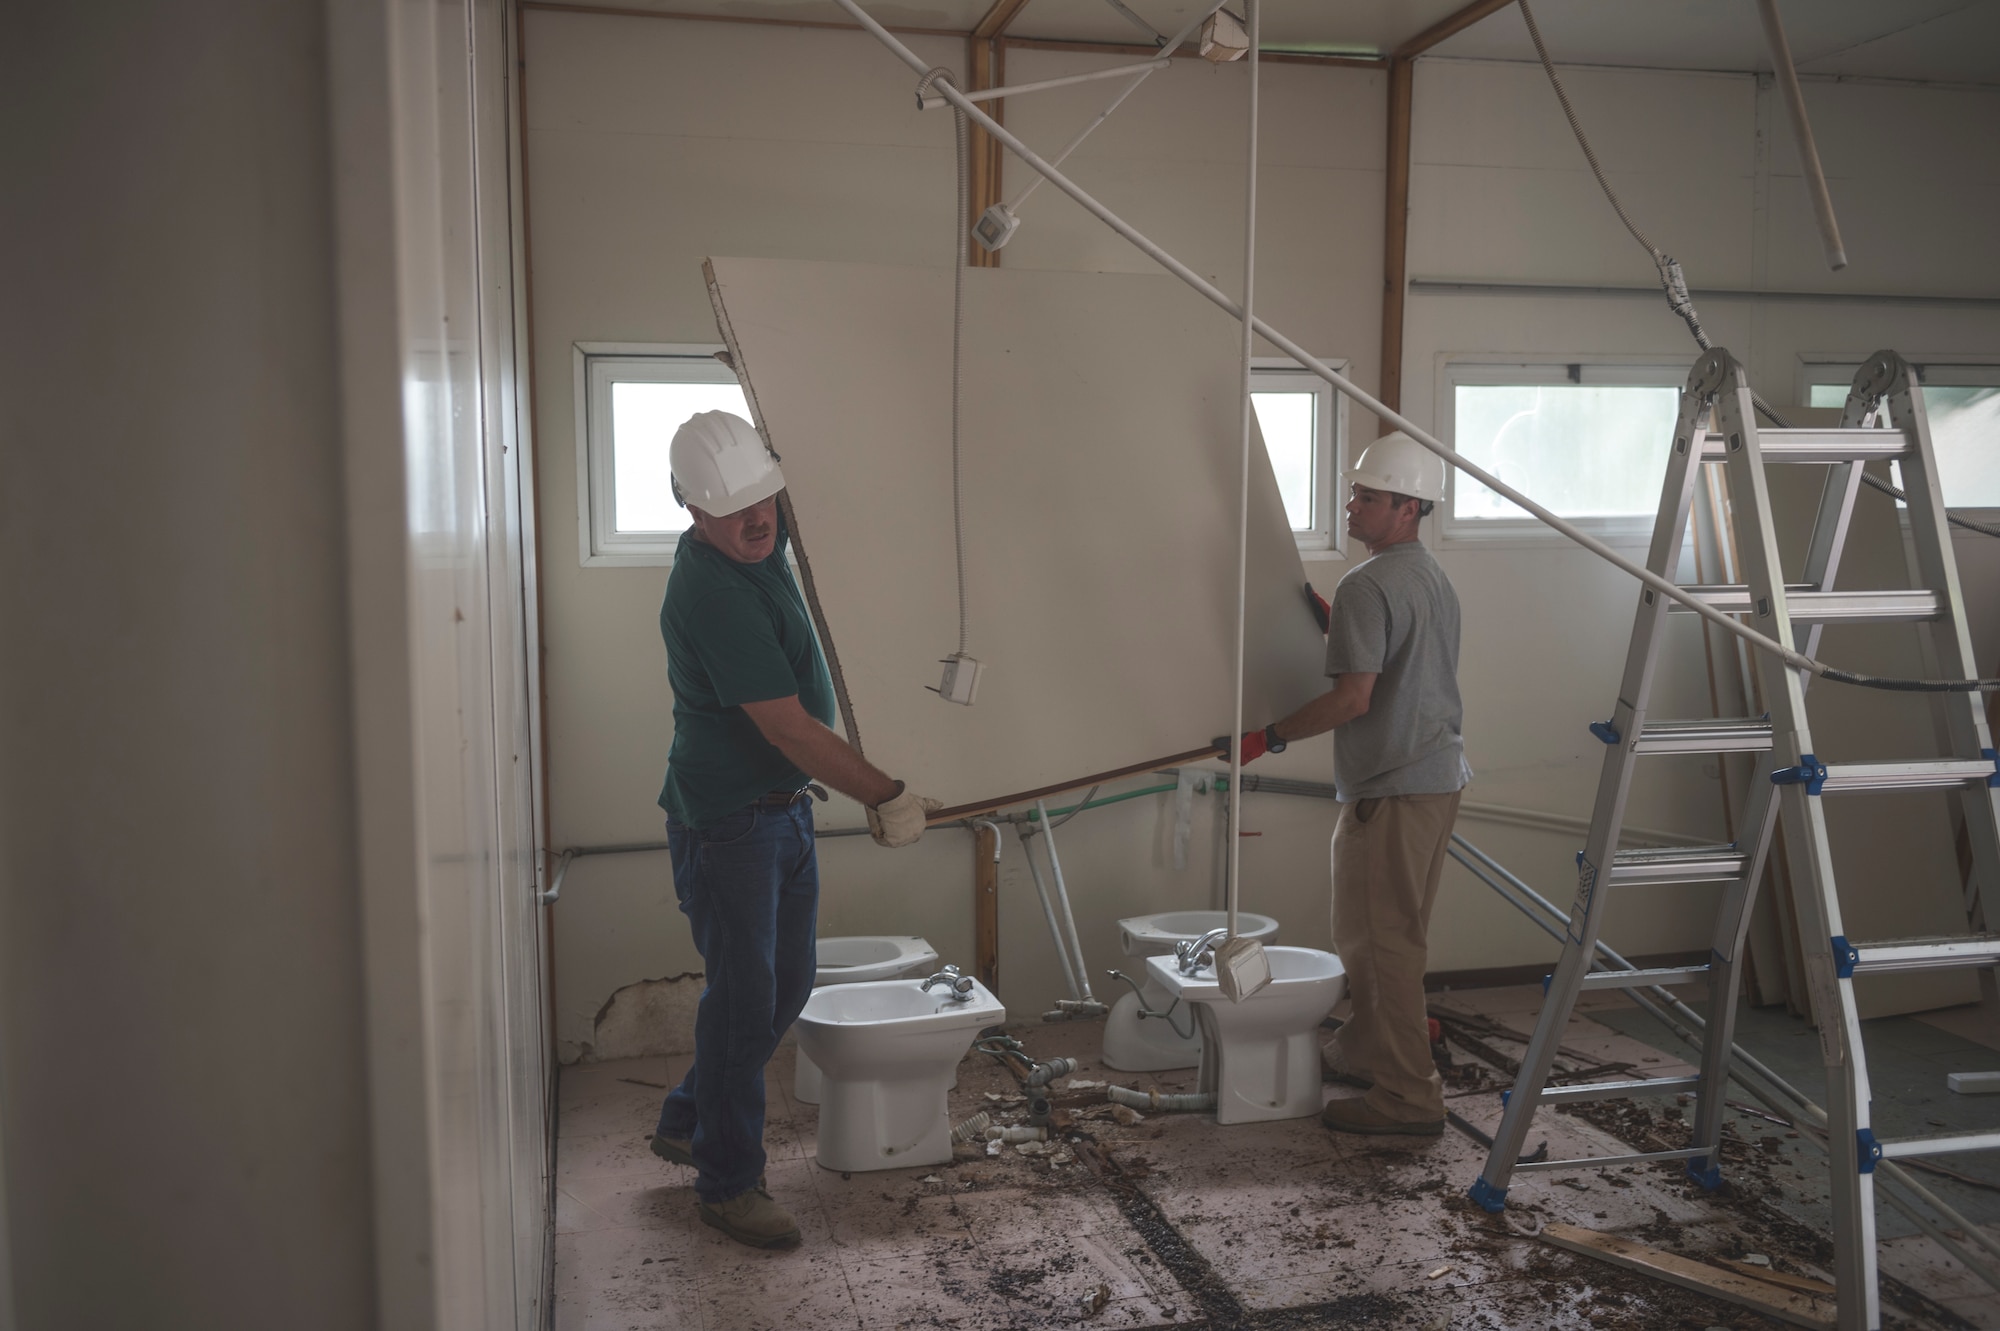 Airmen from the 107th Civil Engineer Squadron, Niagara Falls Air Reserve Station, N.Y., remove walls roof from the clinic in Vau Dejes, Albania, in order to repair the structure and replace damaged walls during June 18-July 2, 2016. The Airmen did such renovations as replacing walls, windows, doors and installing a 5,000 liter water tank as part of a Deployment For Training. (U.S. Air Force Photo by Staff Sgt. Ryan Campbell/released)